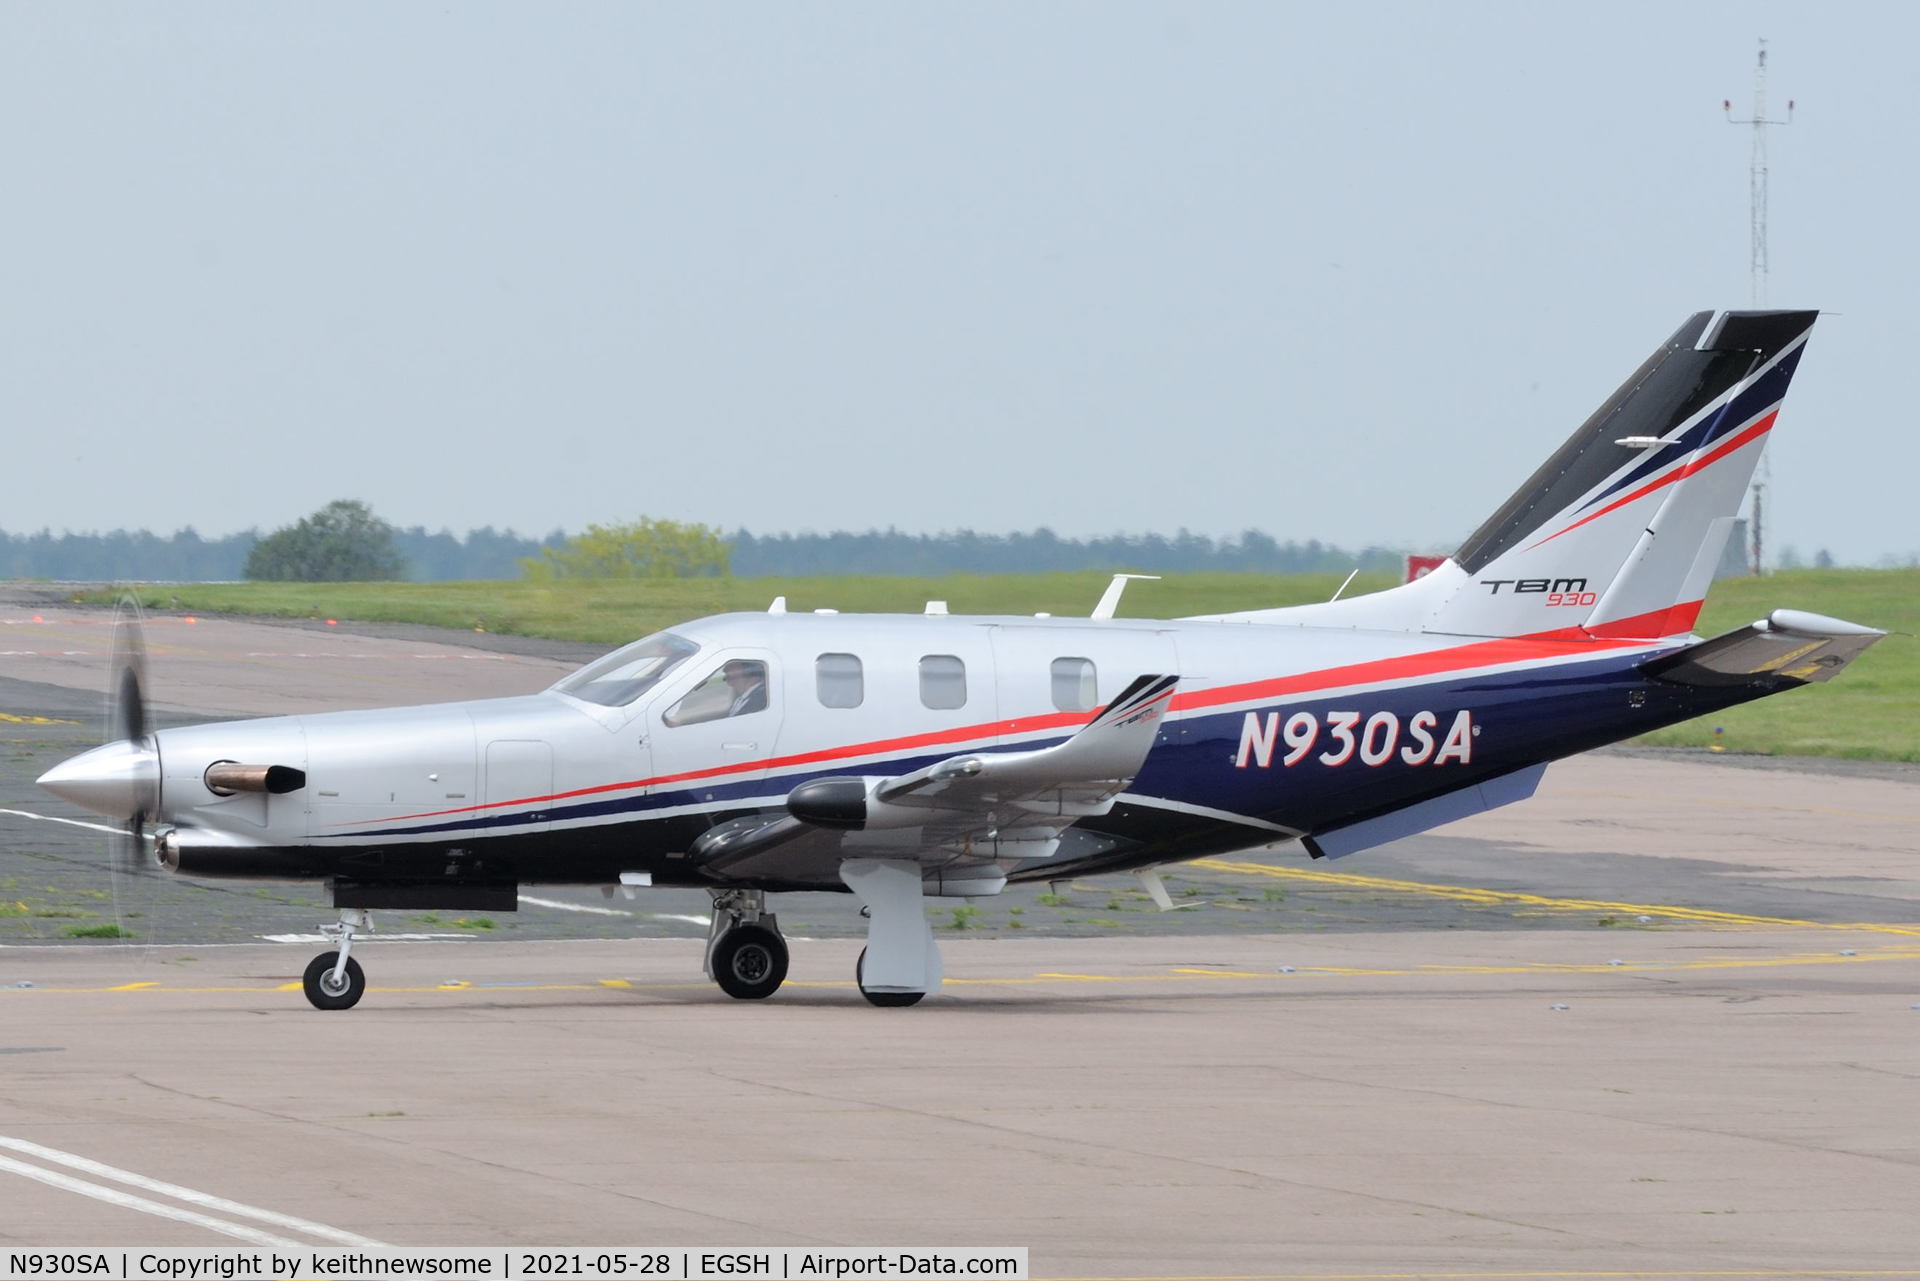 N930SA, 2018 Daher TBM-930 C/N 1241, Arriving at Norwich from Cheltenham.